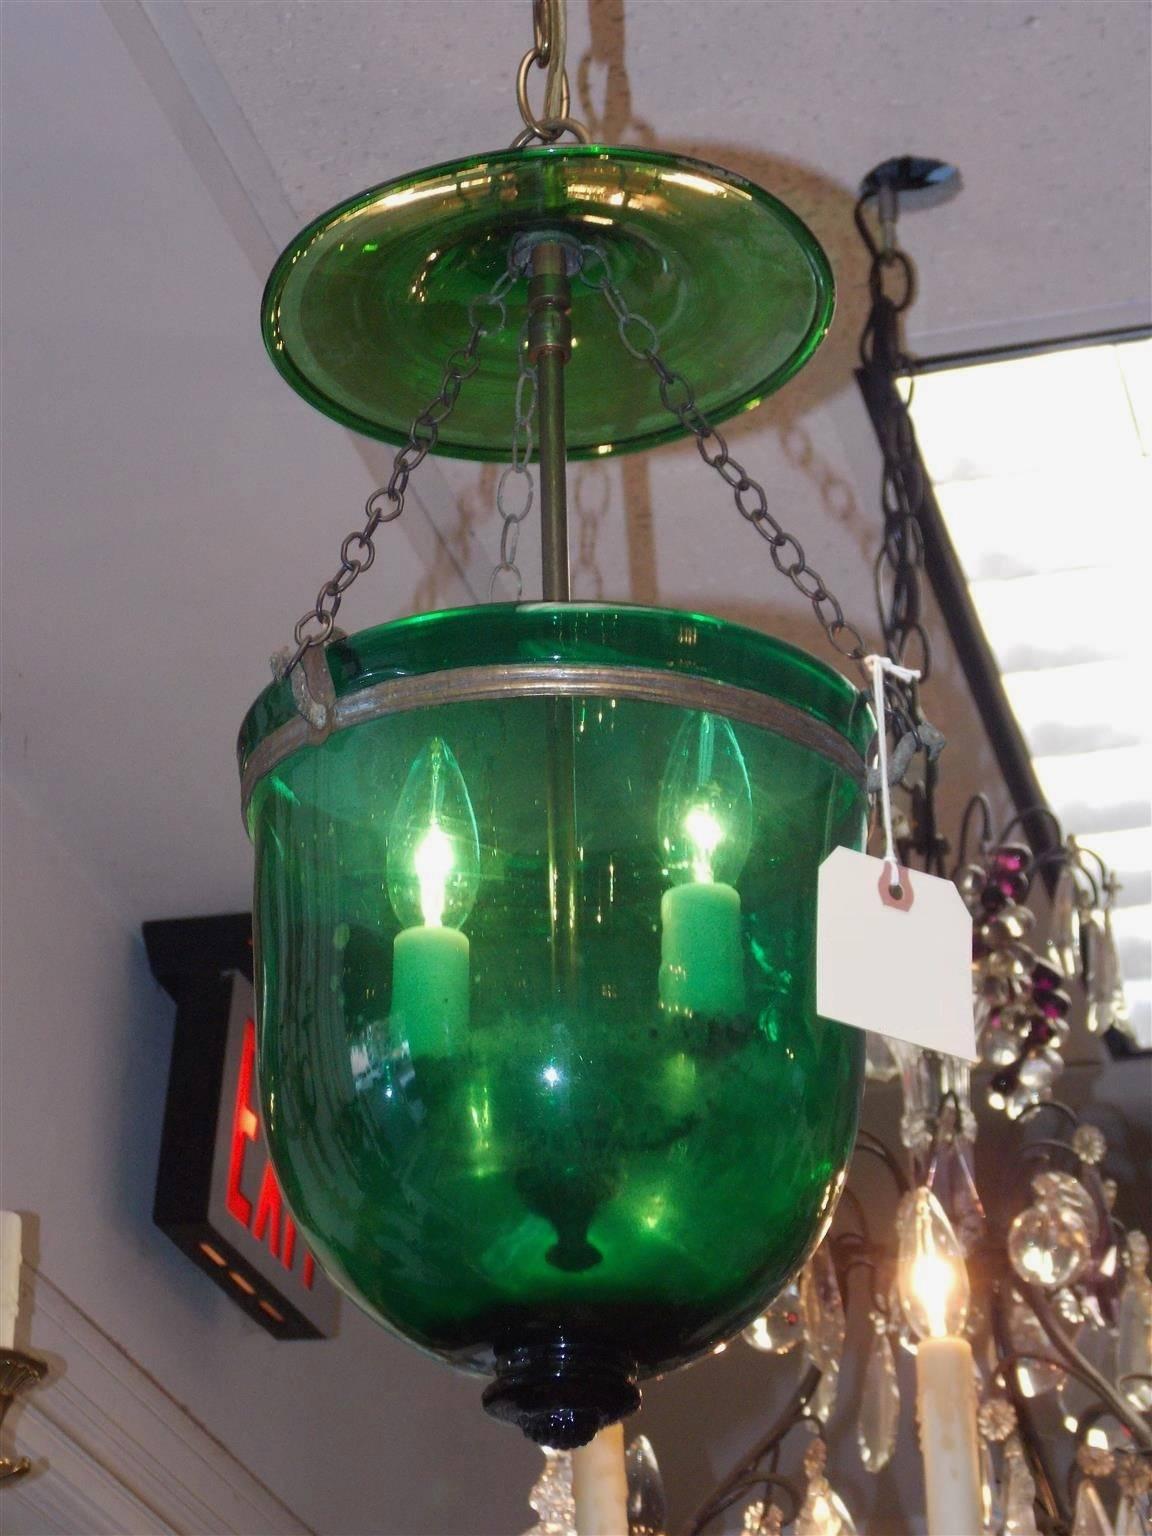 English Emerald green hand blown glass and decorative bronze two-tiered hanging bell jar hall lantern with fitted two light interior cluster. Early 19th Century. Originally candle powered.